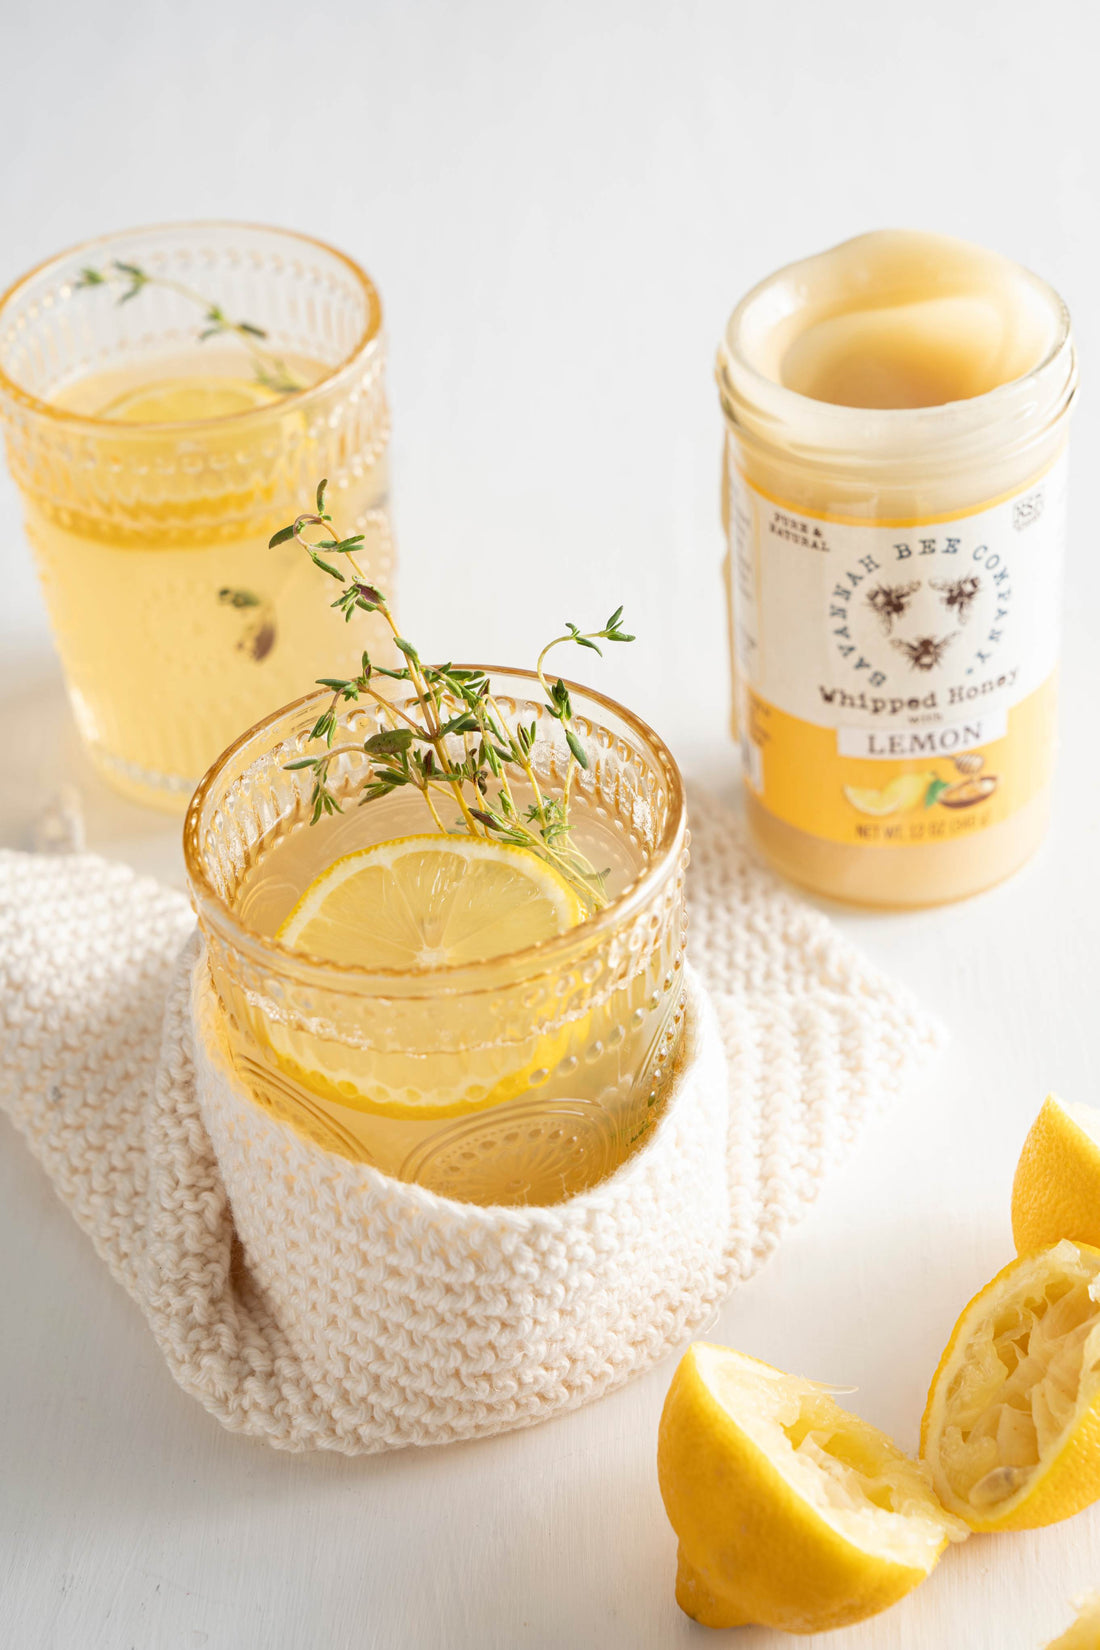 teds-lemon-thyme-toddy-recipe